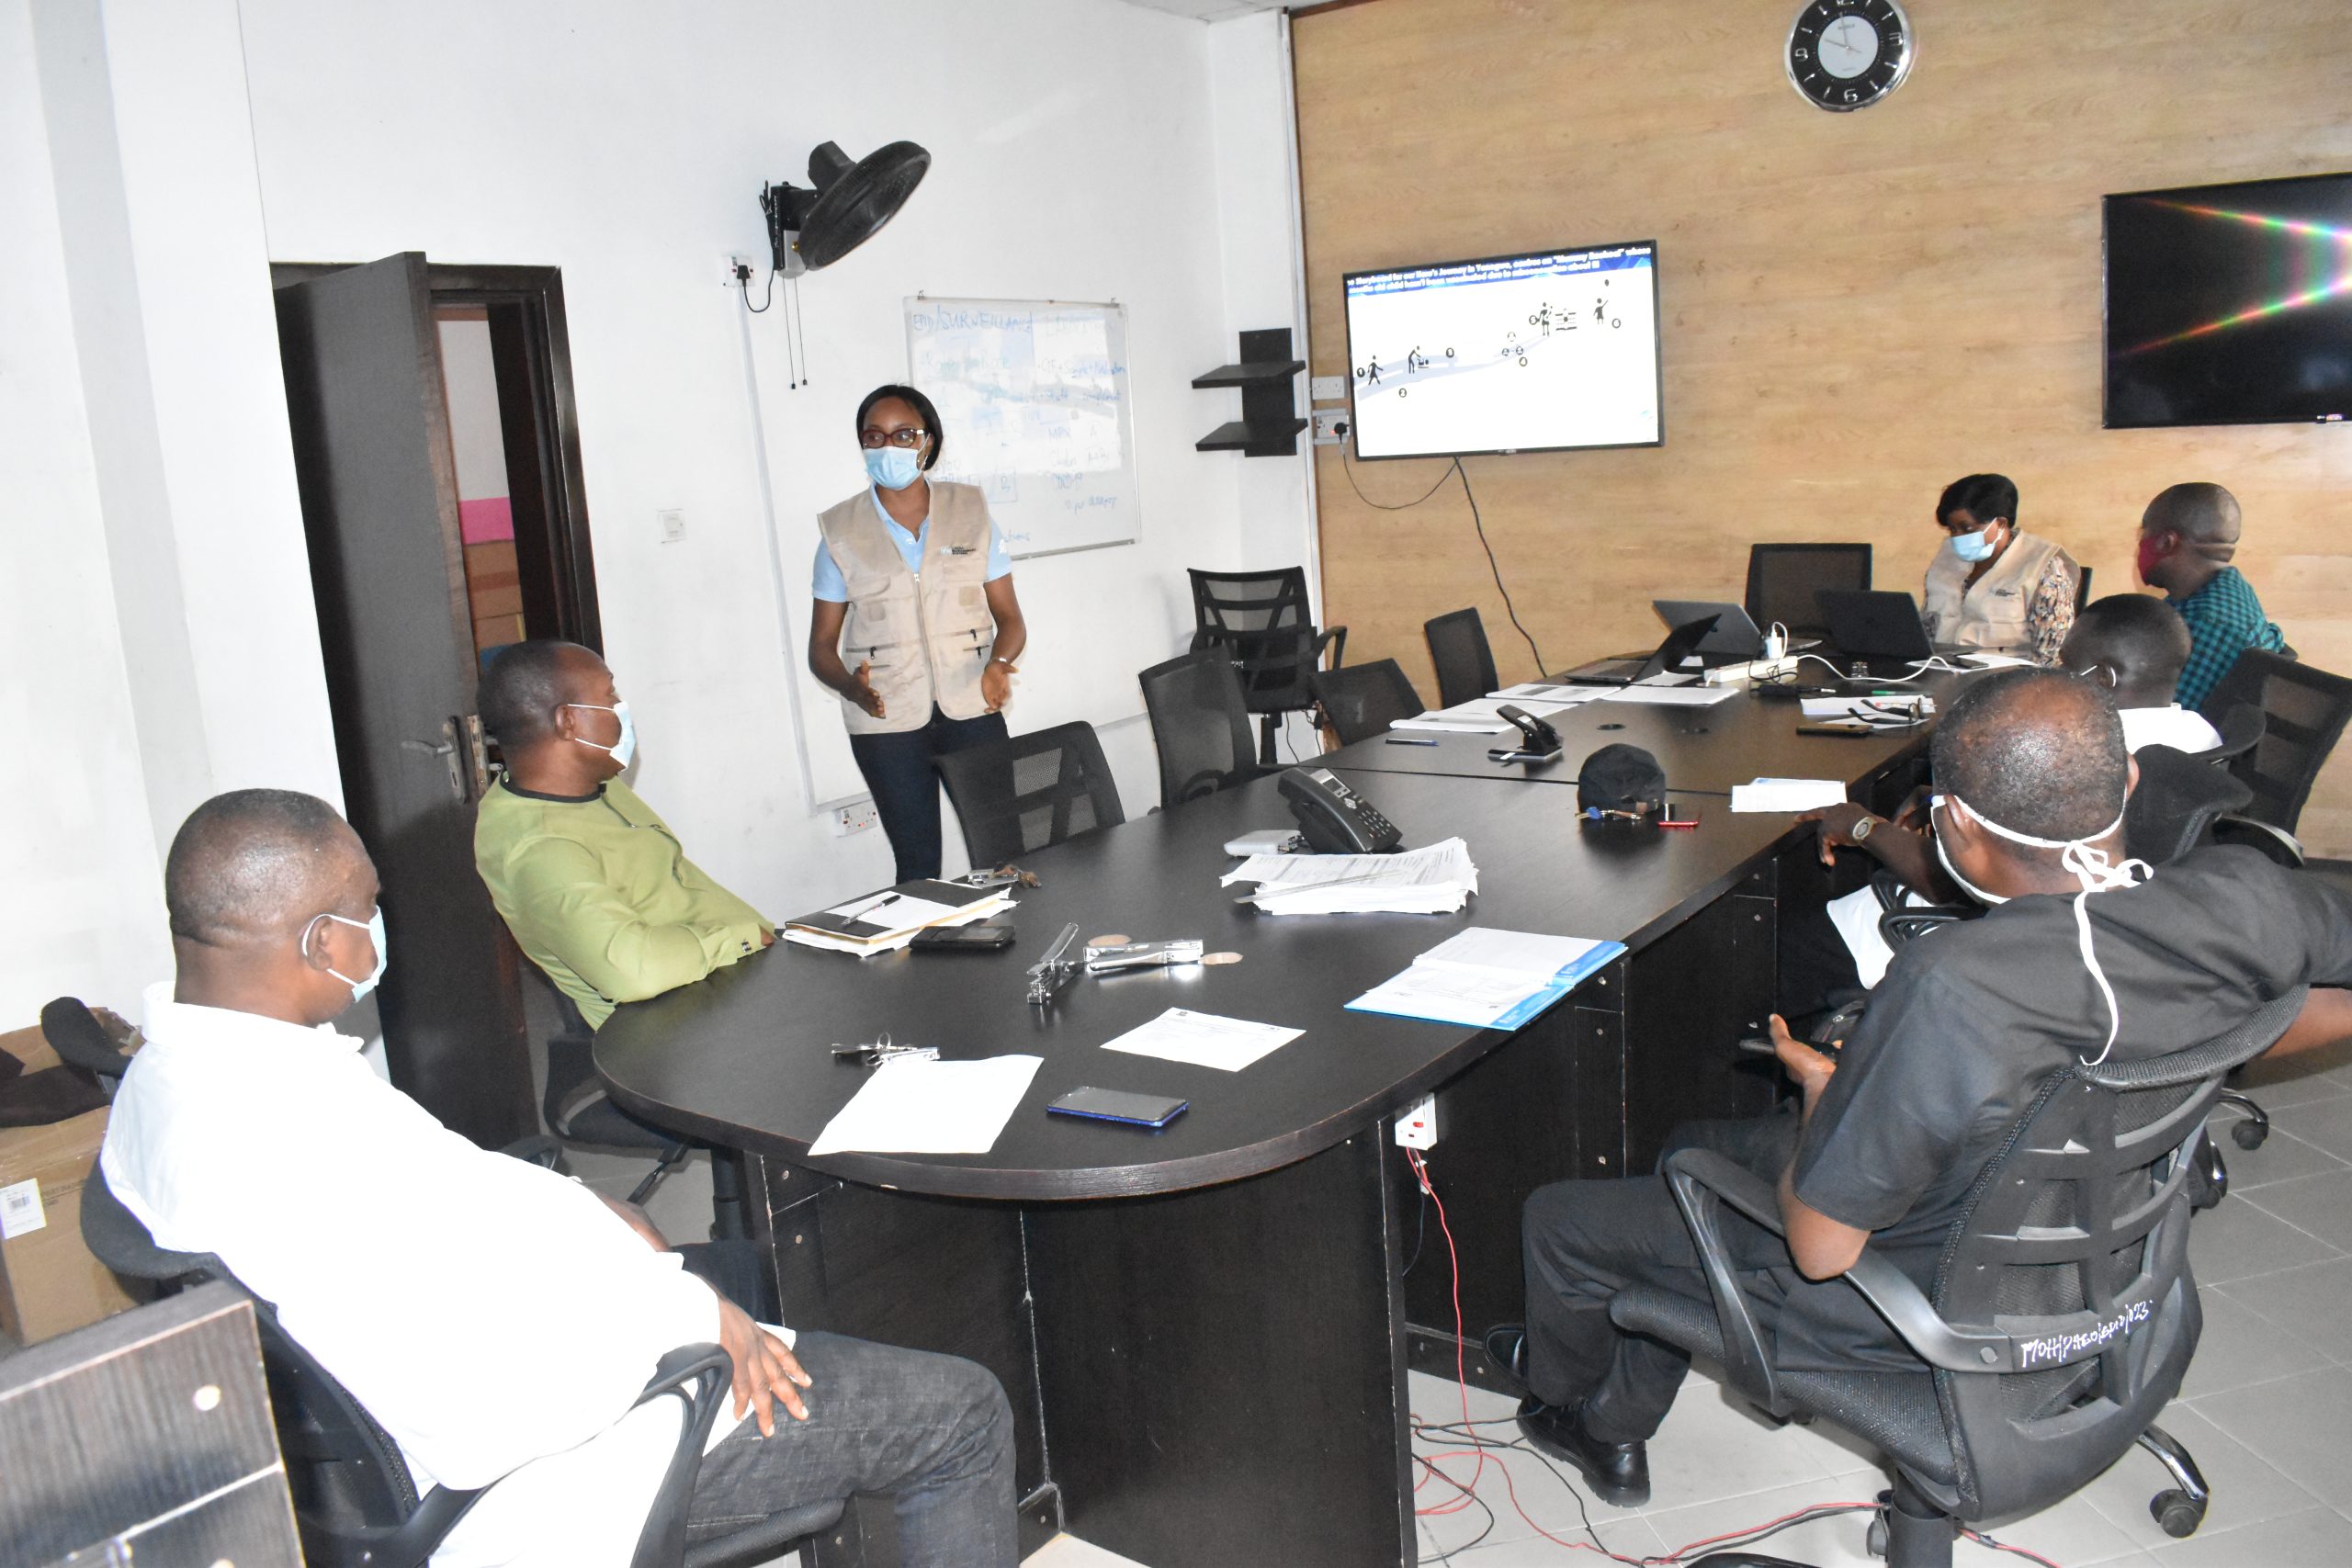 Group of 7 people who are part of the local government area (LGA) immunization team, all sitting around an oval desk with masks on in the middle of discussion with a presentation on display in the background